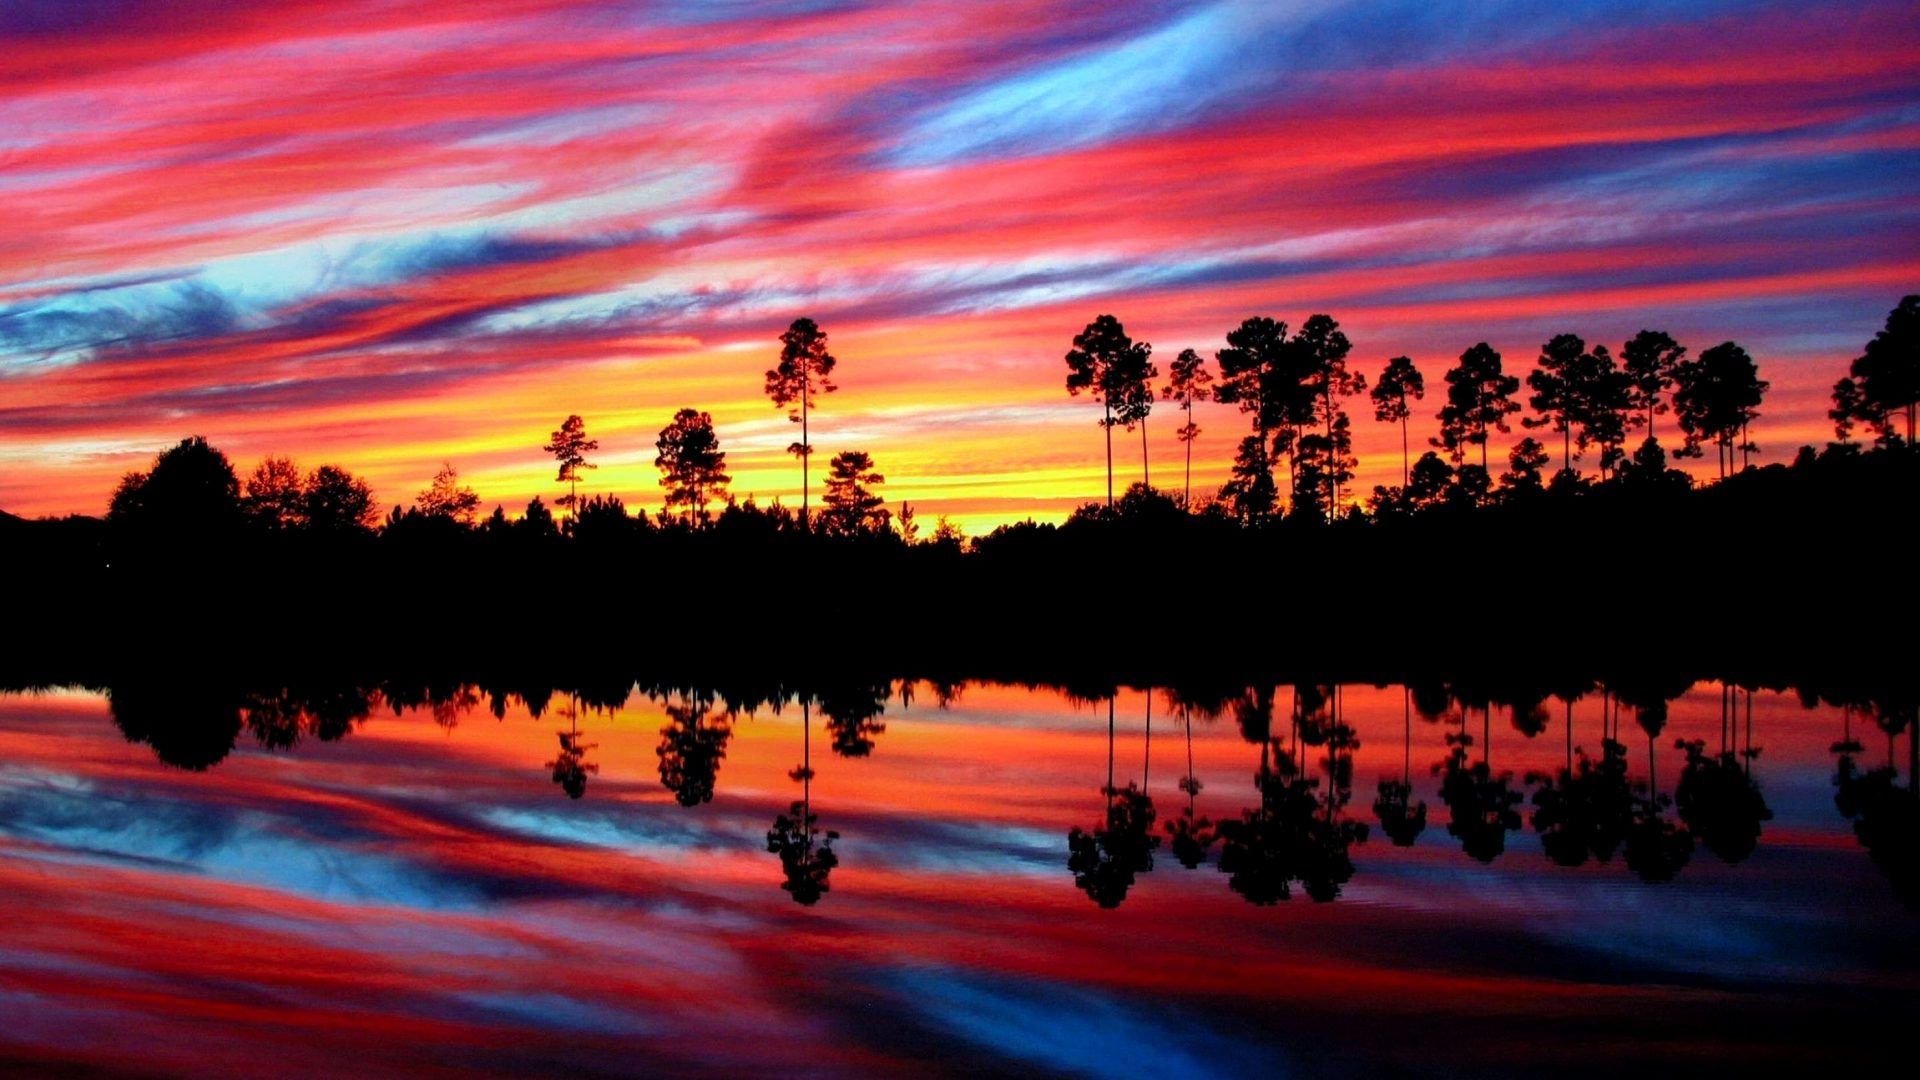 Colorful Tag Sunsets Sunset Amazing Sky Colorful Nature